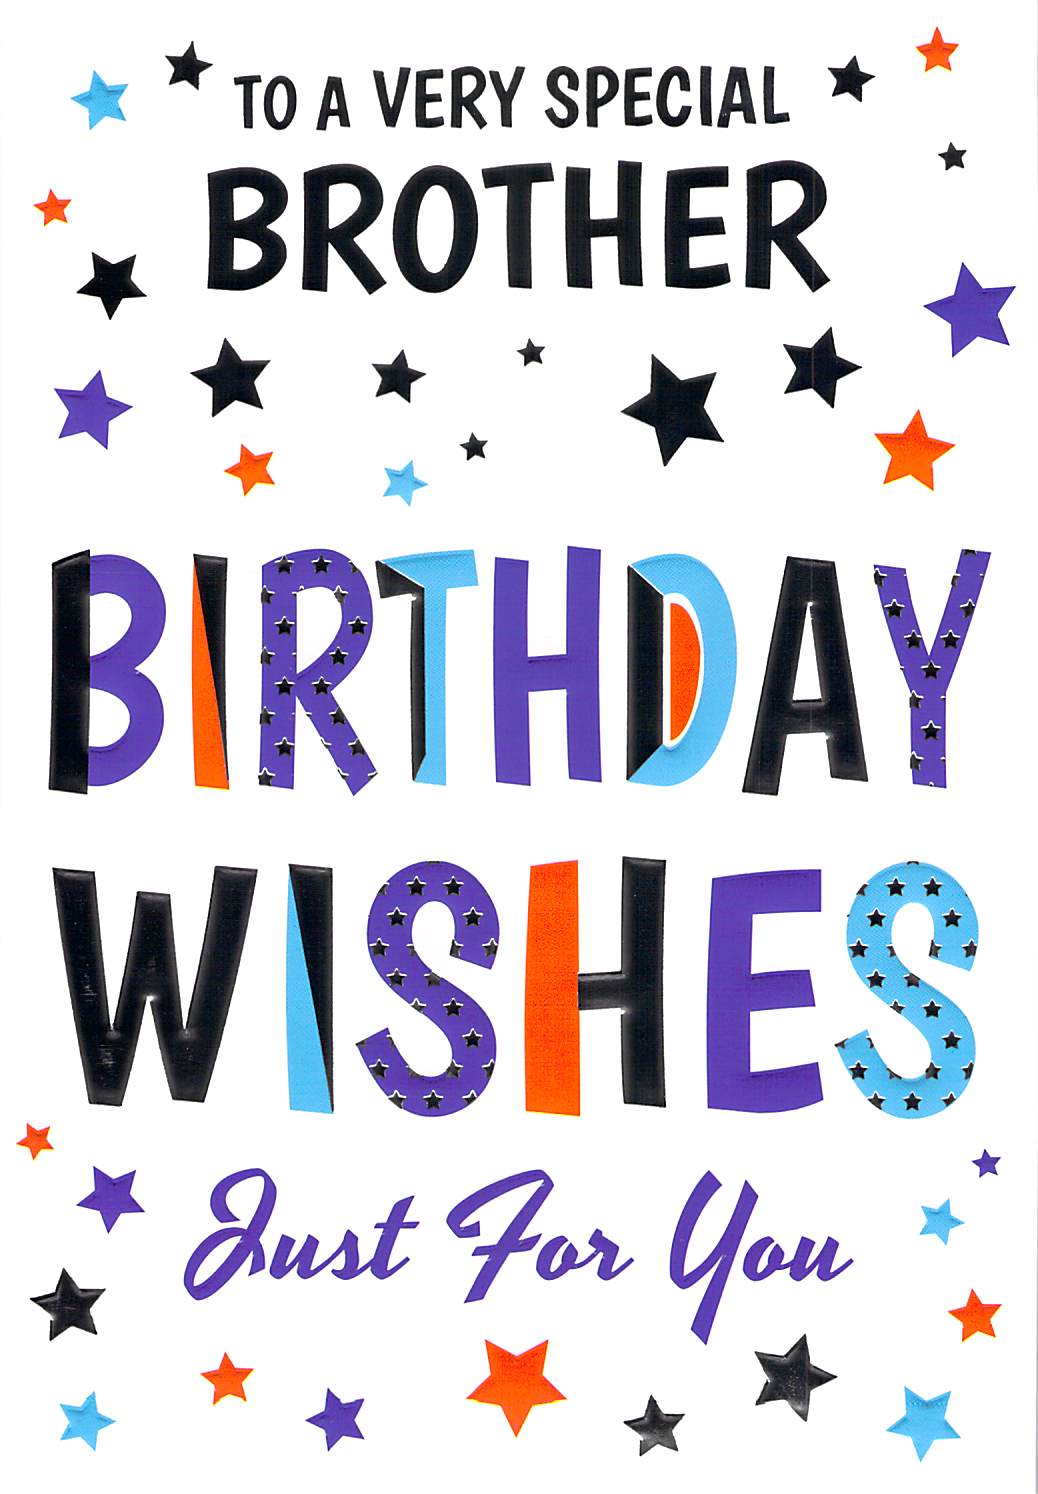 Brother Birthday Card - Birthday Wishes - Greeting Card - Free Postage